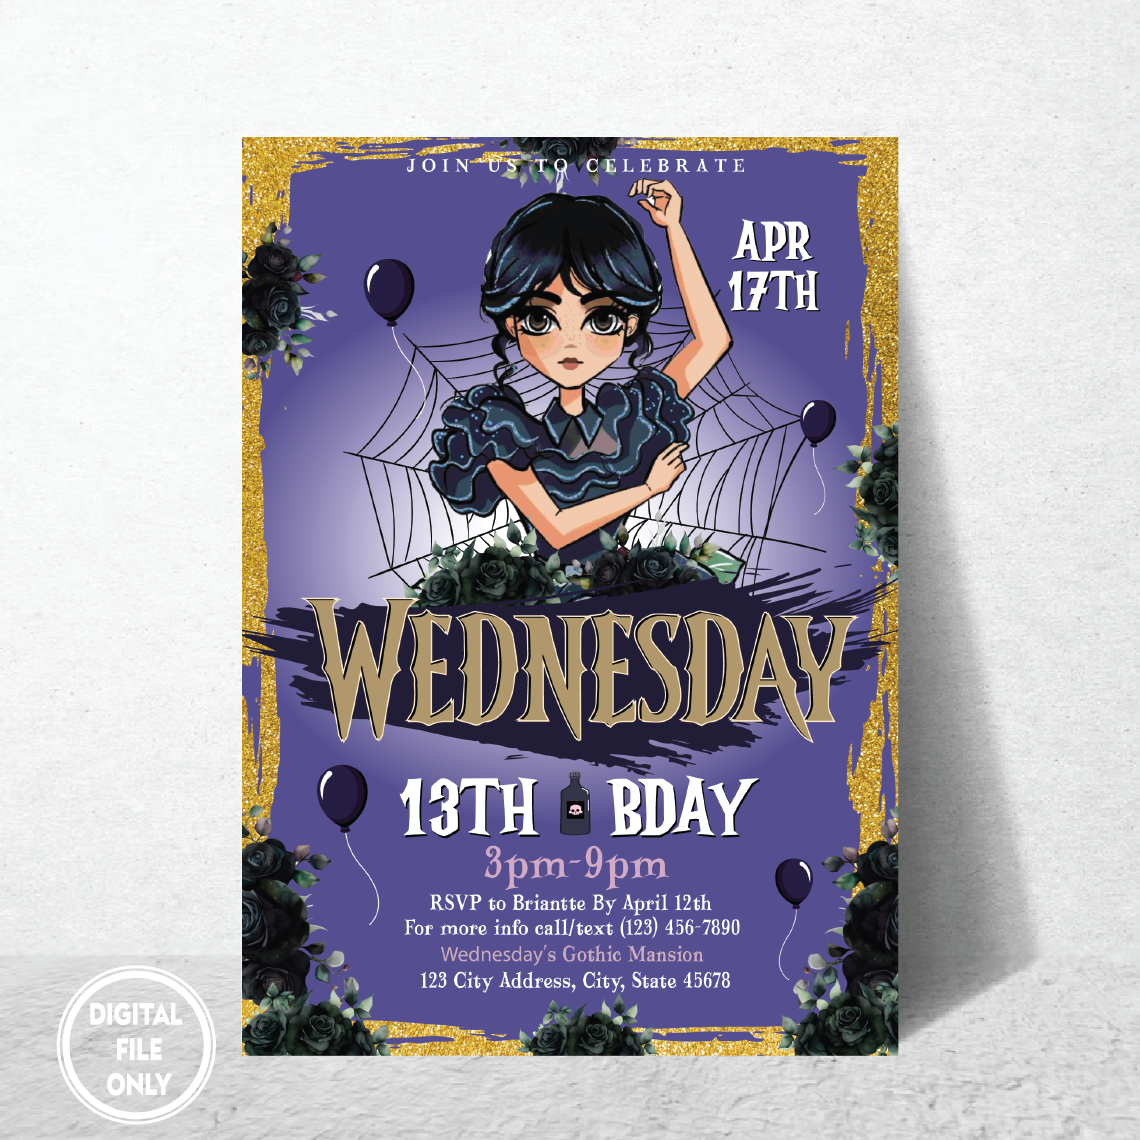 Personalized File Wednesday Birthday Invitation Party Invite Printable Editable Addams Family Digital Kid Cake Topper Girl Boy Instant Download PNG File Only